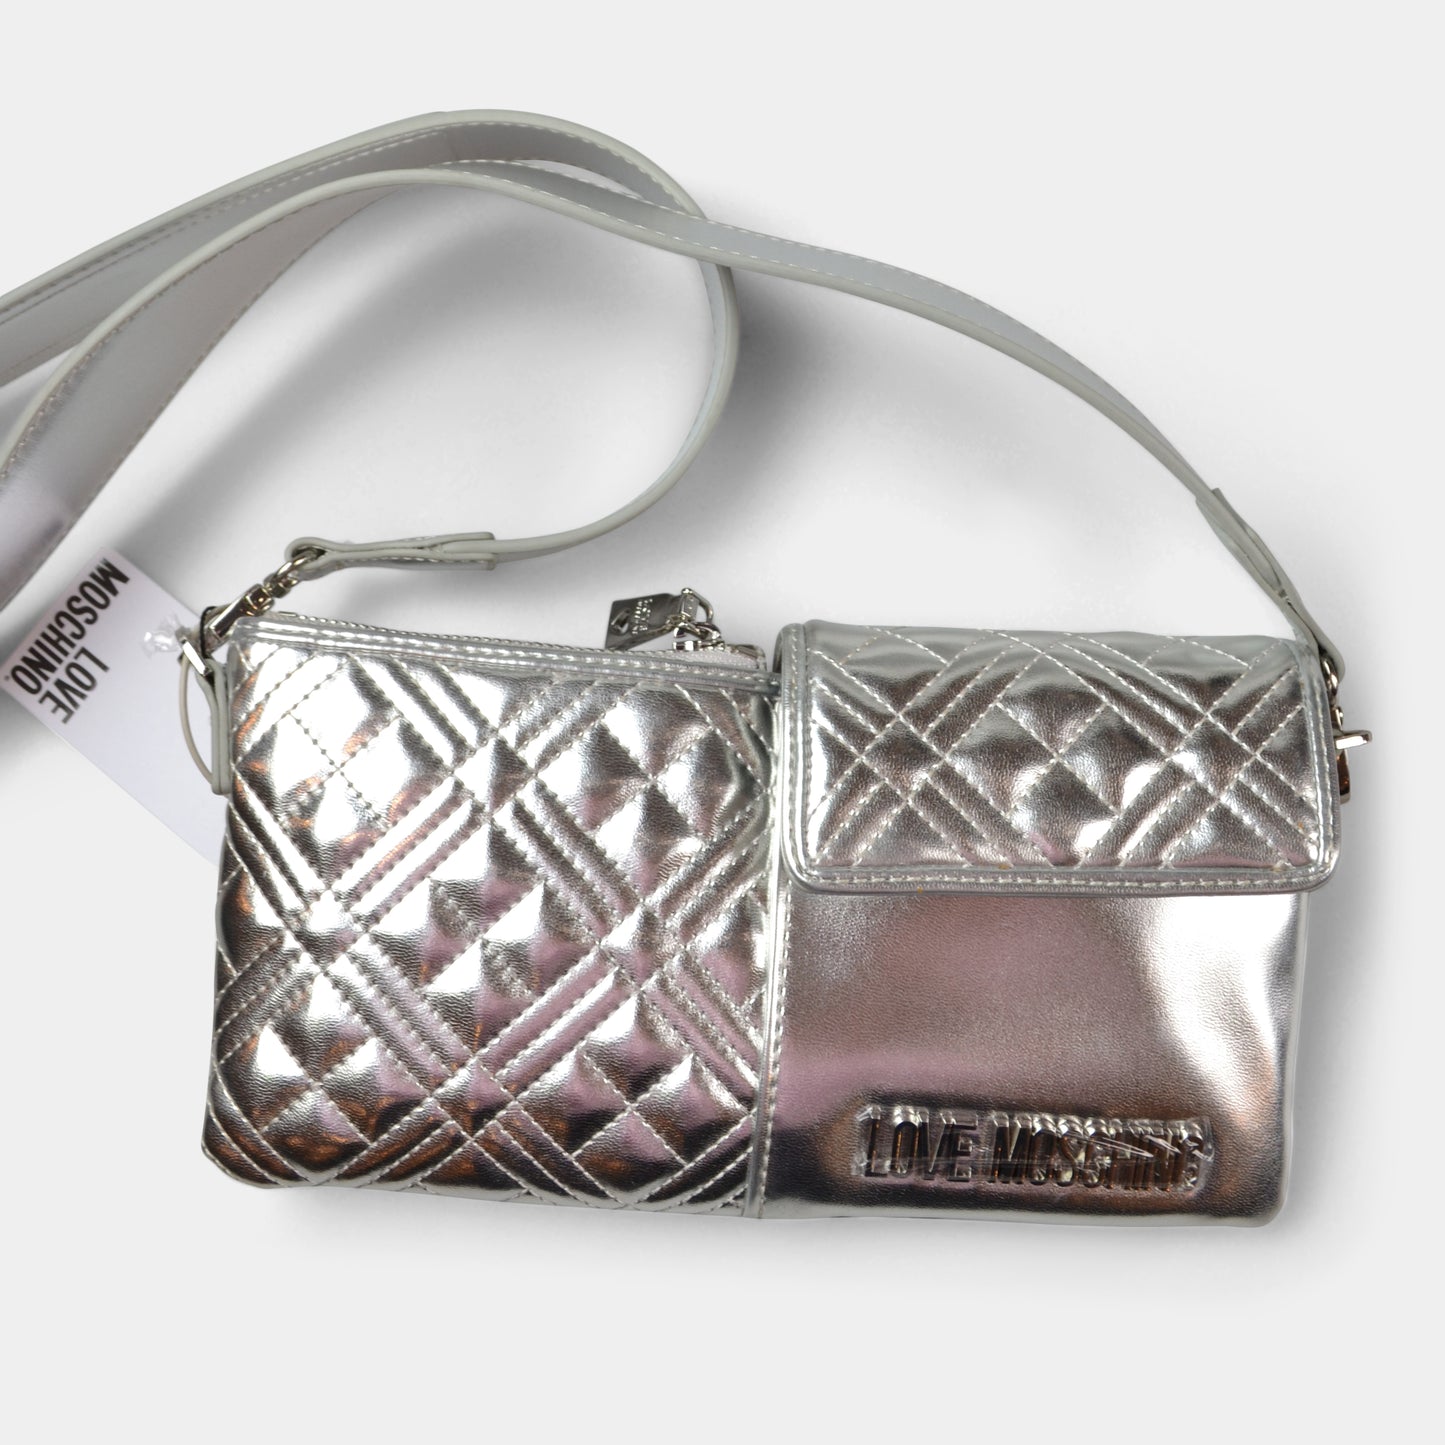 LOVE MOSCHINO SILVER FANNY PACK